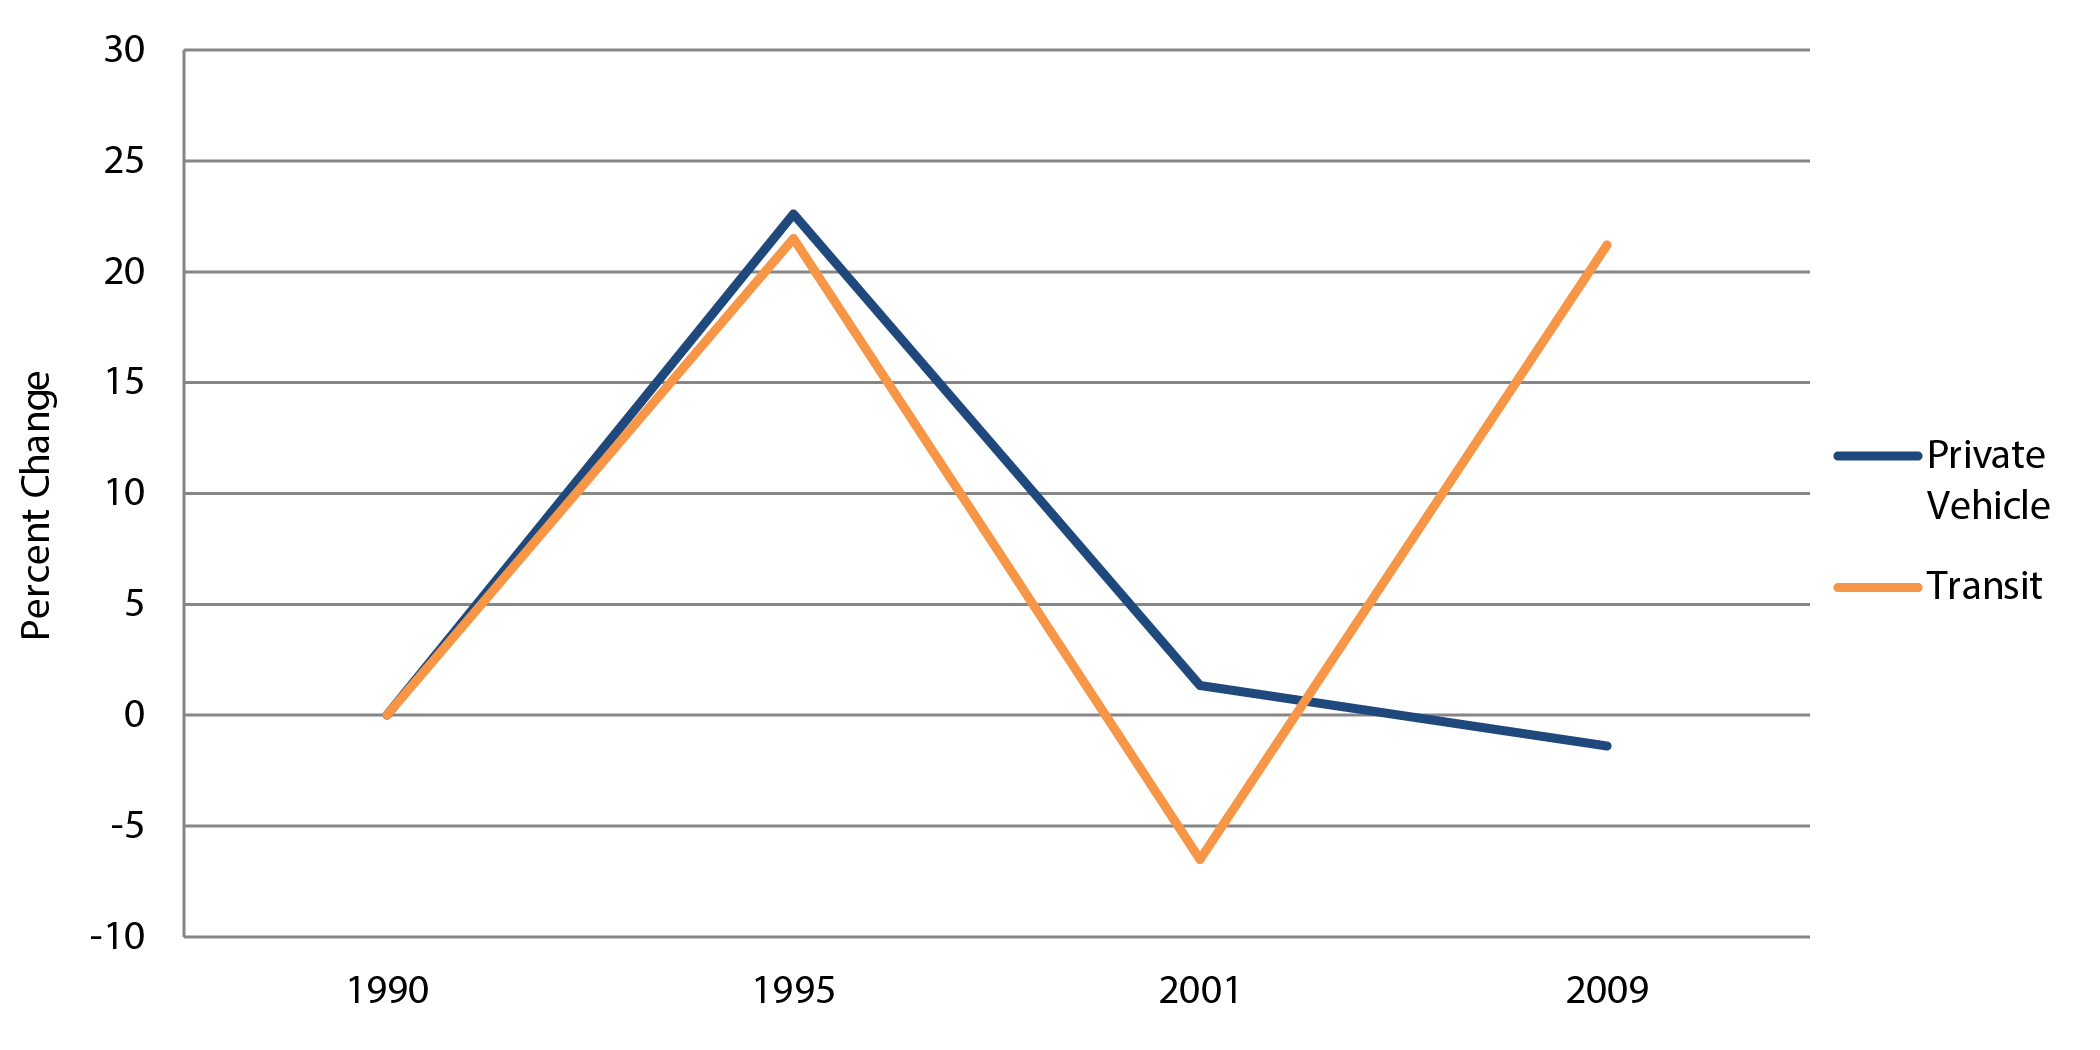 Line chart displays percent change in trips by private vehicle and transit travel modes in the years 1990, 1995, 2001, and 2009. For private vehicle travel mode, the trend begins with an initial value of 0 percent in 1990. The trend starts upward to its highest point of 22.6 percent in 1995, where it then sharply decreases to 1.34 percent in 2001. The trend continues to go downward, ending at its lowest point of -1.4 percent in 2009. For transit travel mode, the trend begins with an initial value of 0 percent in 1990. The trend starts upward to its highest point at 21.5 percent in 1995, where it then sharply decreases to its lowest point of -6.5 percent in 2001. The trend then sharply increases, ending at 21.2 percent in 2009. Source: National Household Travel Survey.